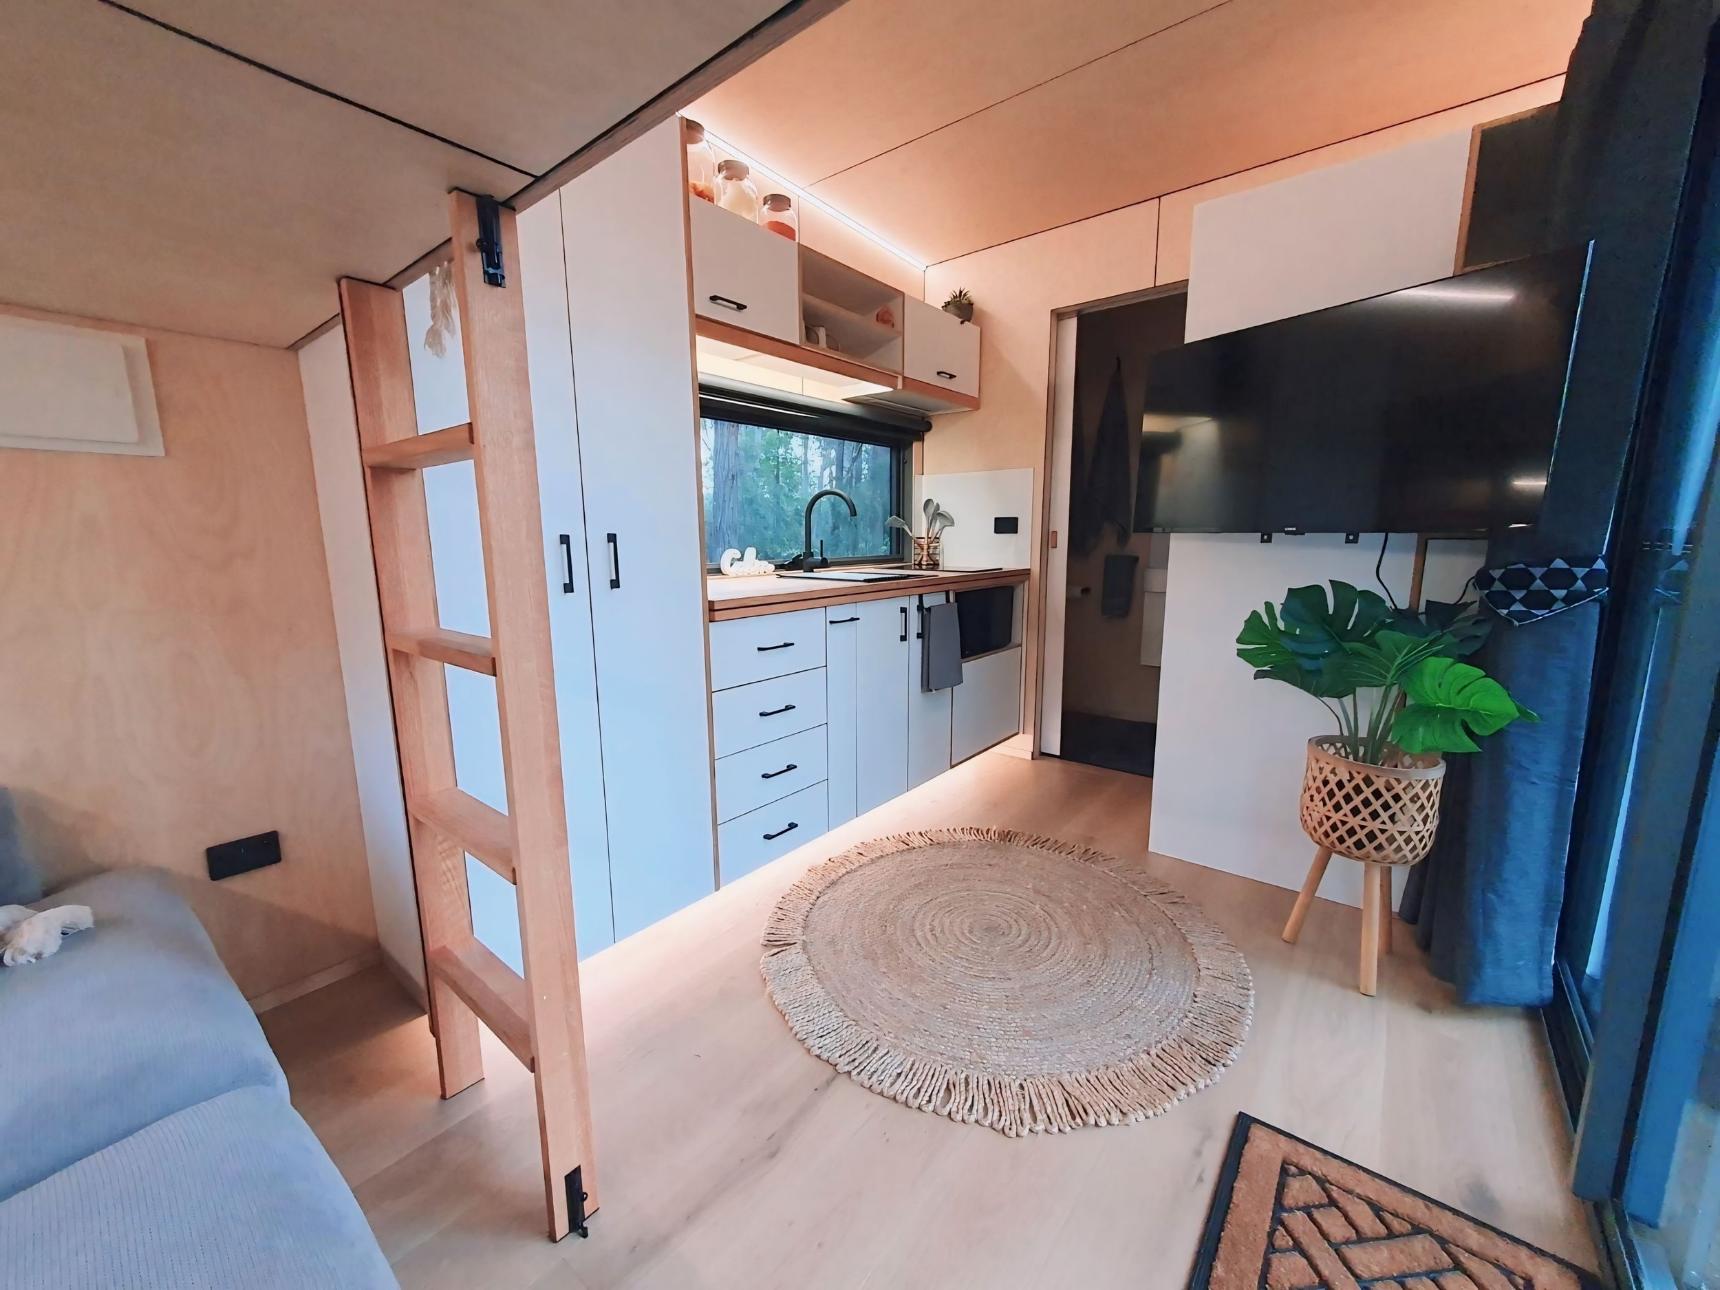 Kitchen with White Cabinets - Chipper by Häuslein Tiny House Co